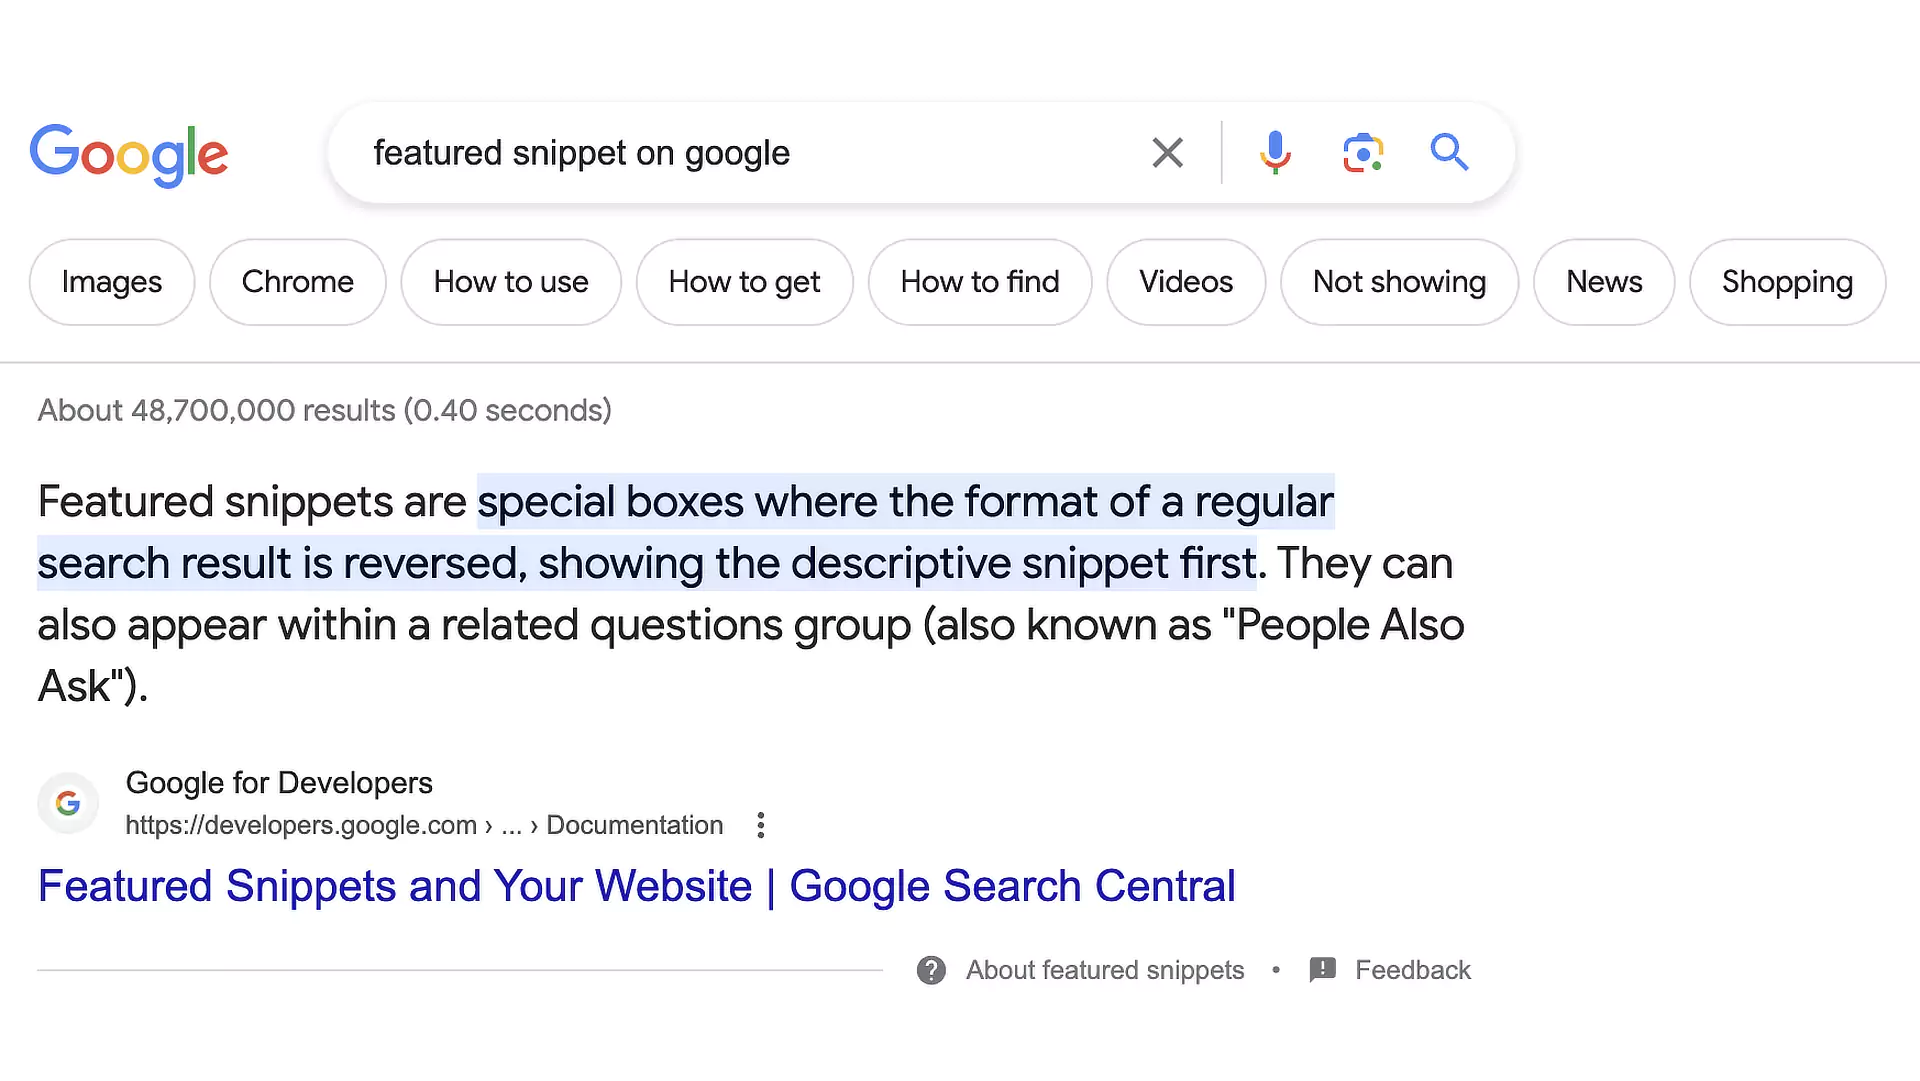 Featured Snippet on Google